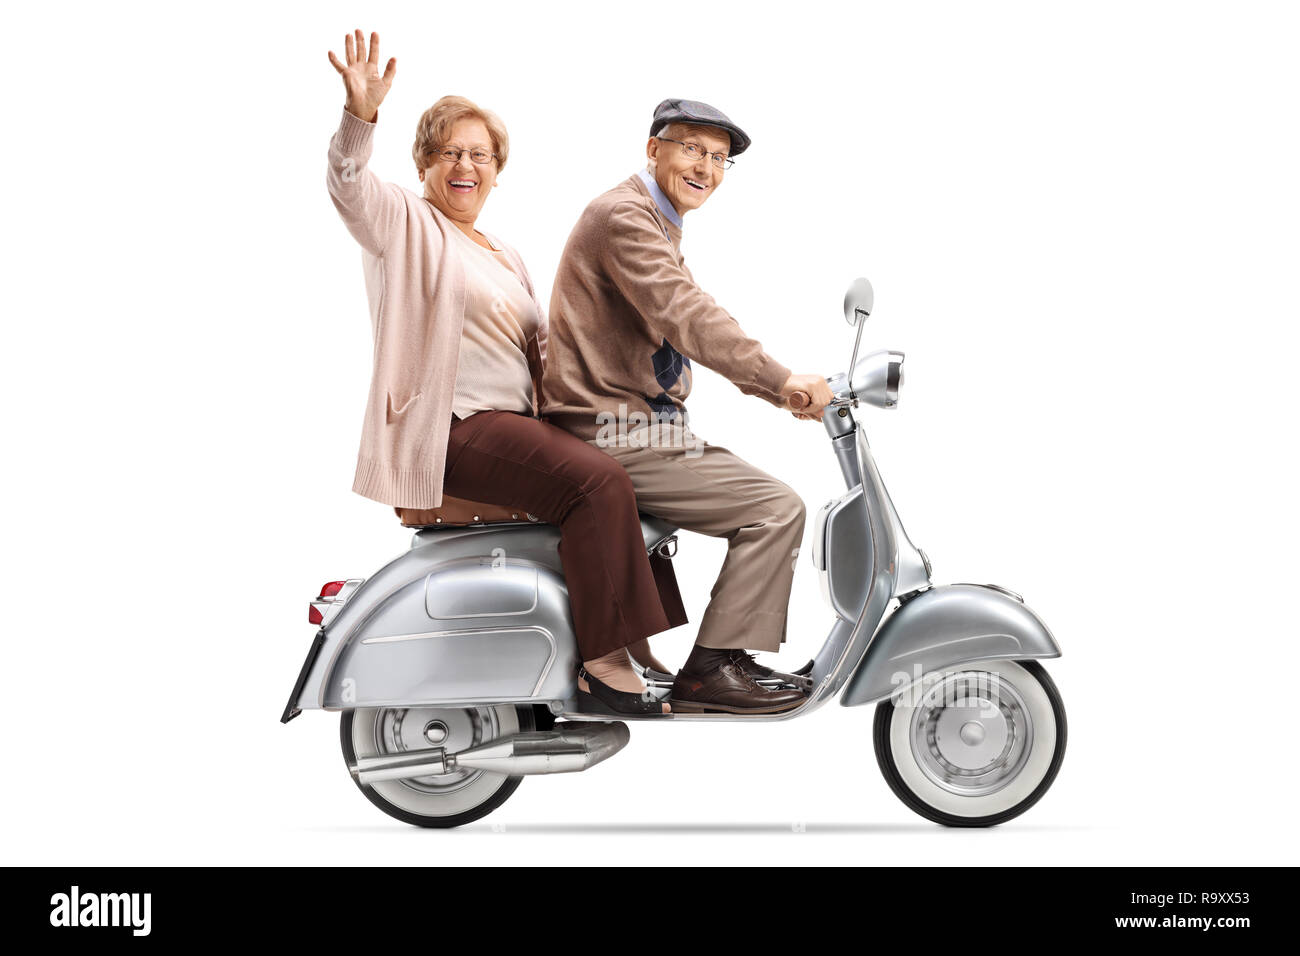 Full length shot of a senior couple riding a vintage scooter and waving isolated on white background Stock Photo